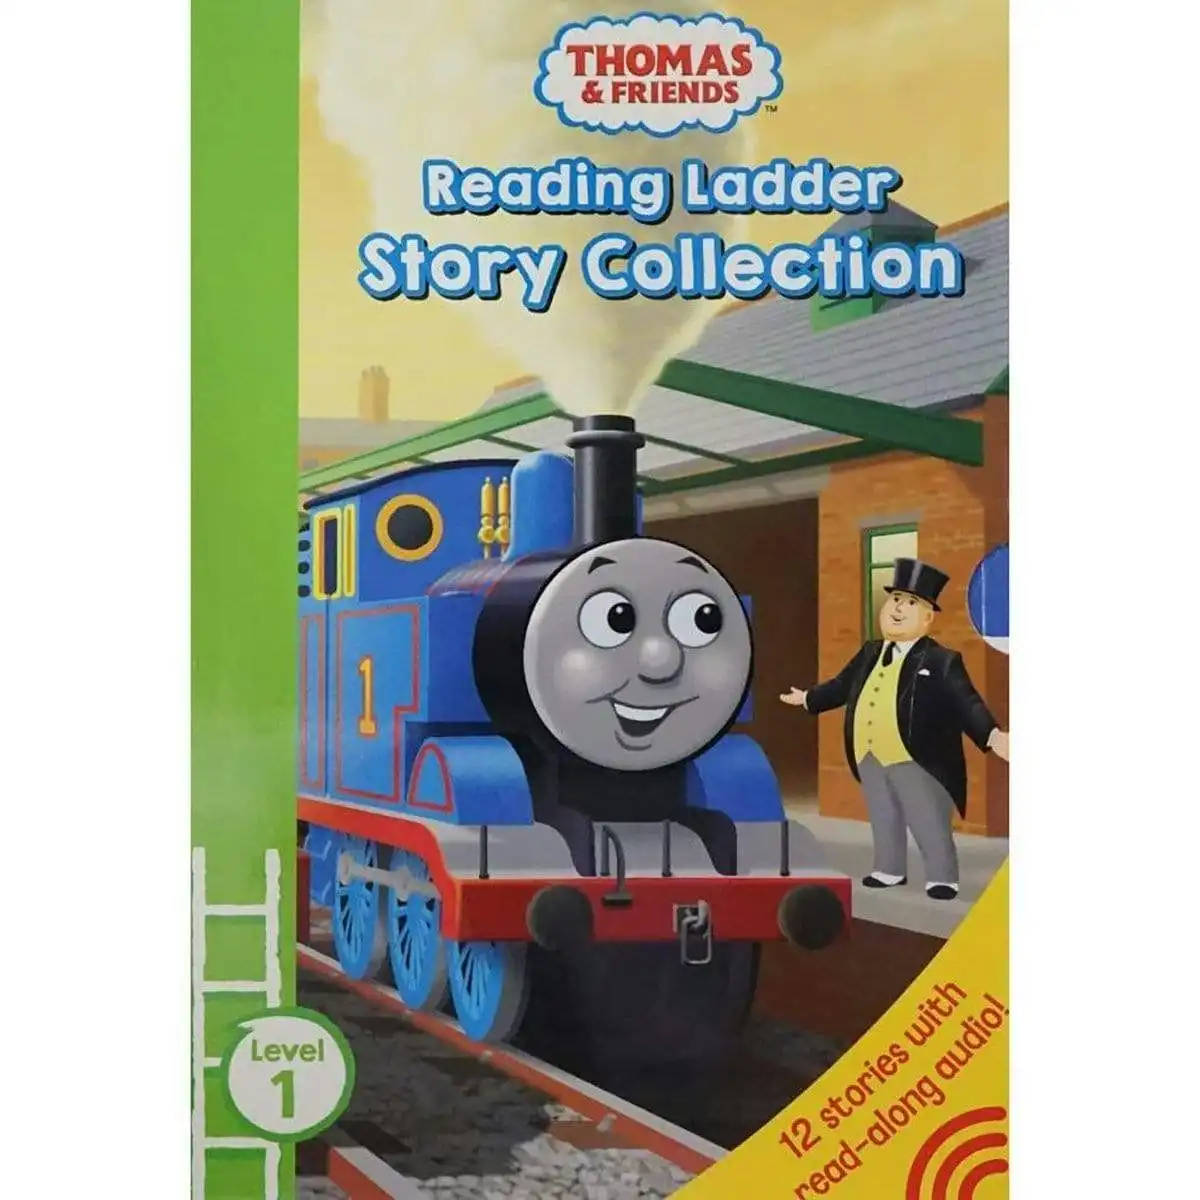 Thomas & Friends Reading Ladder - 6 Copy Book Pack